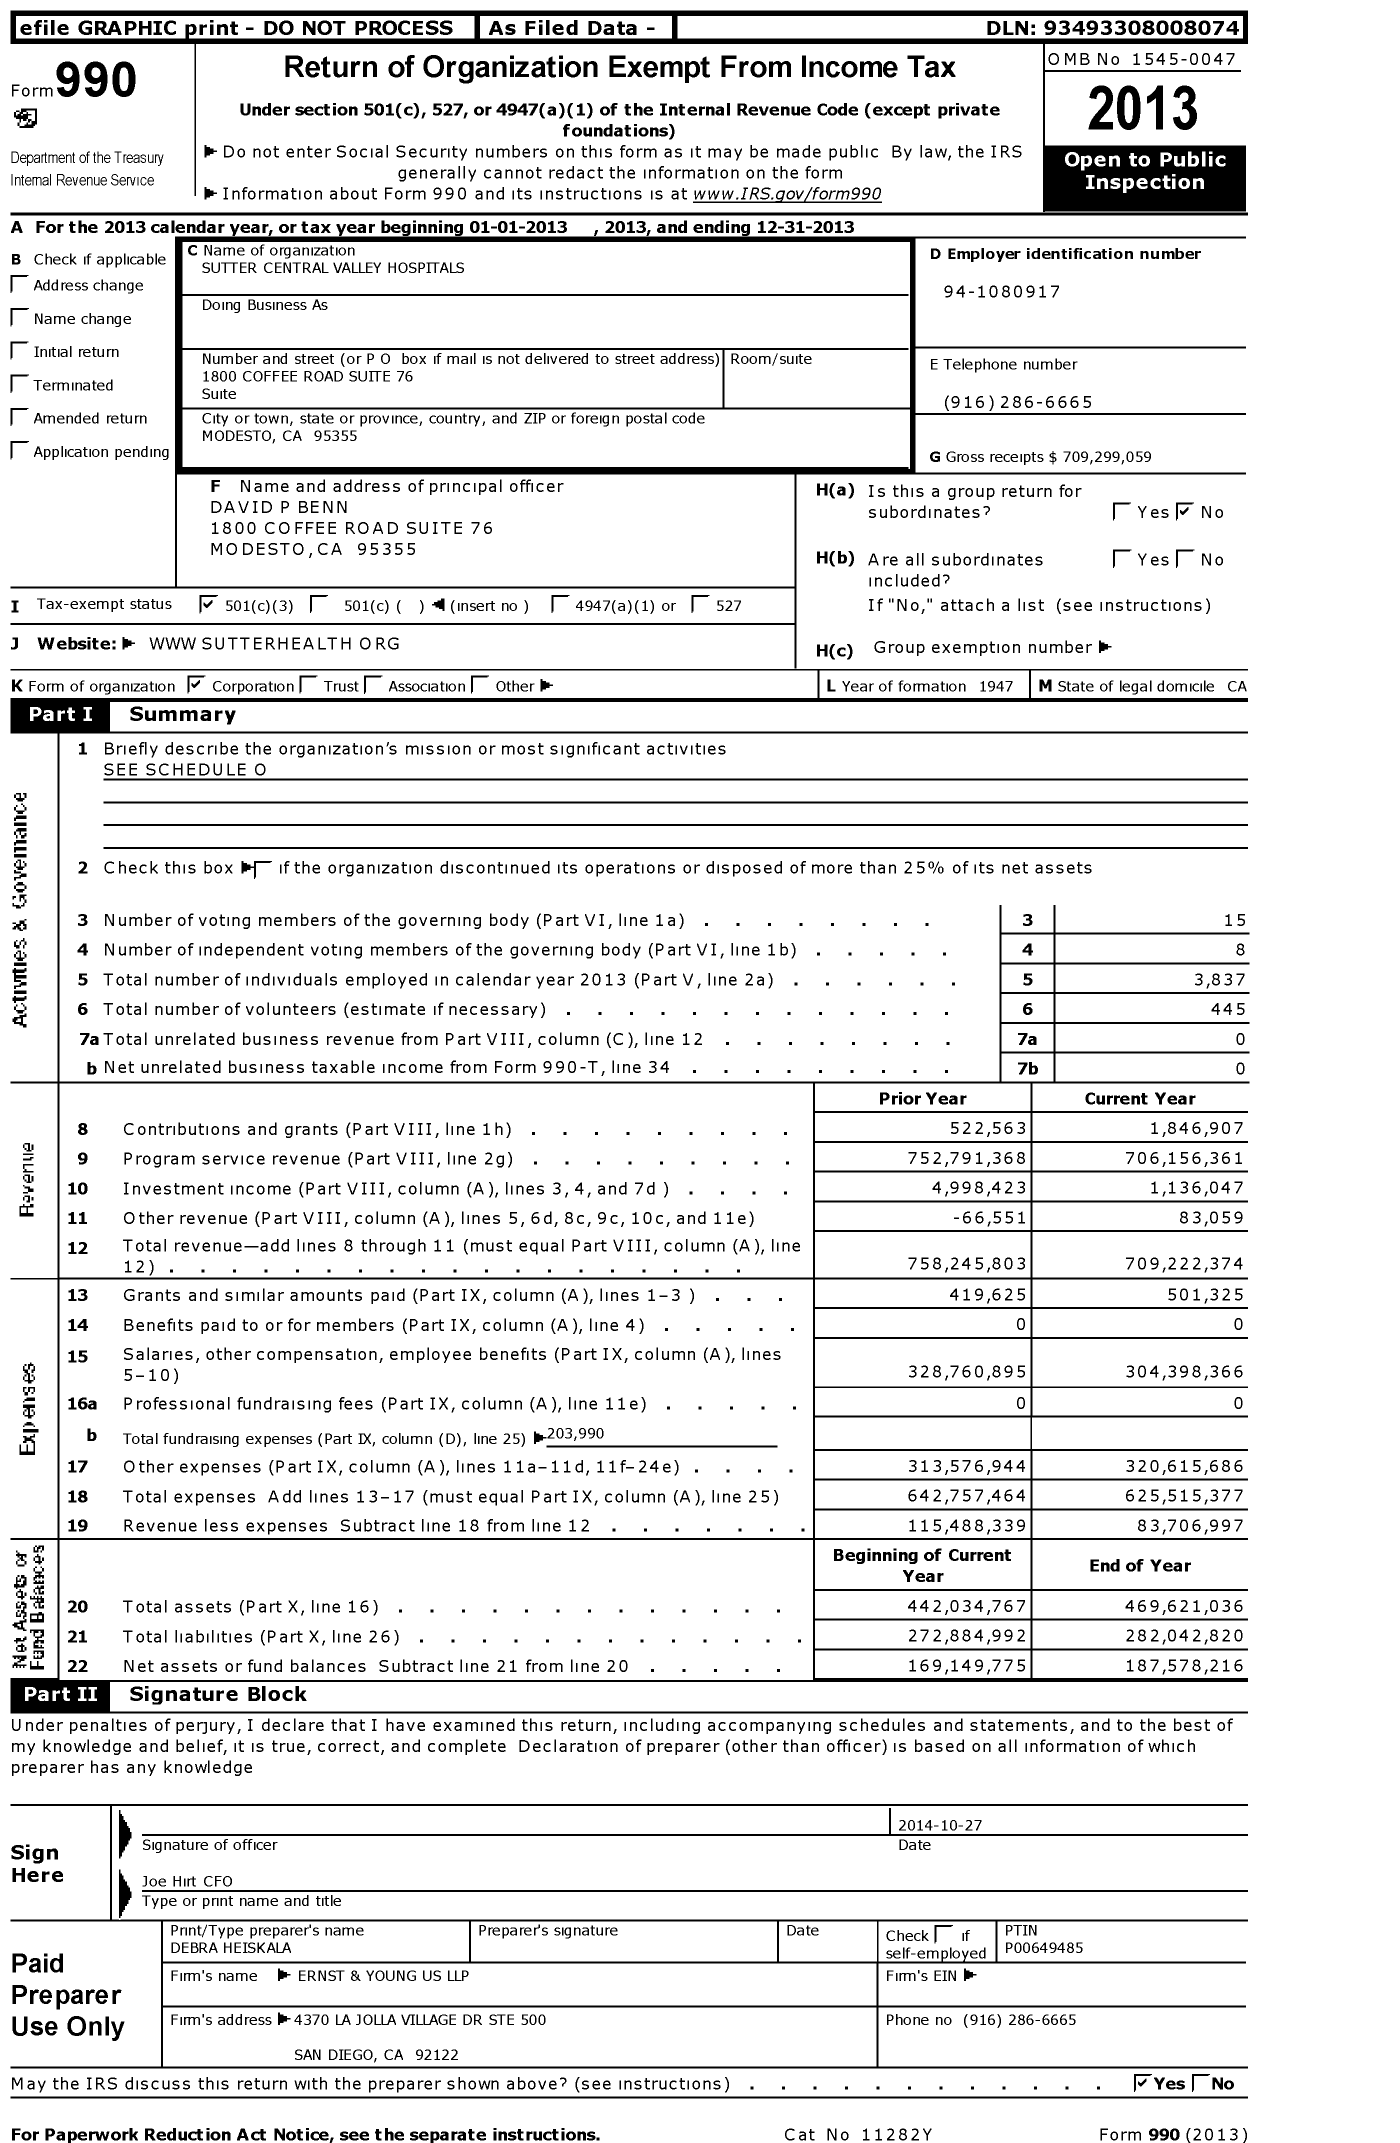 Image of first page of 2013 Form 990 for Memorial Medical Center (MMC)